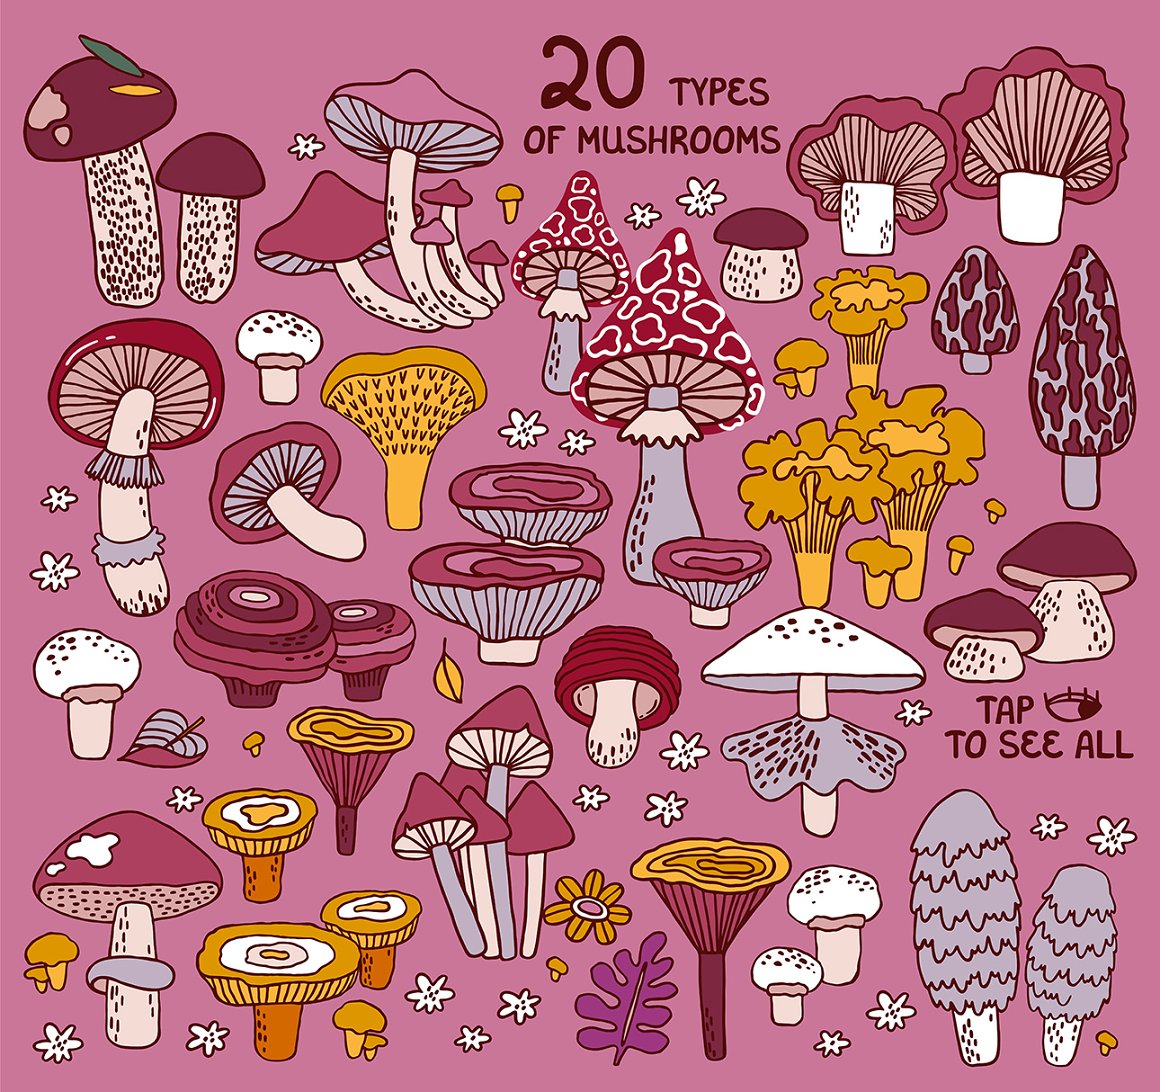 Mushrooms with a pink background.